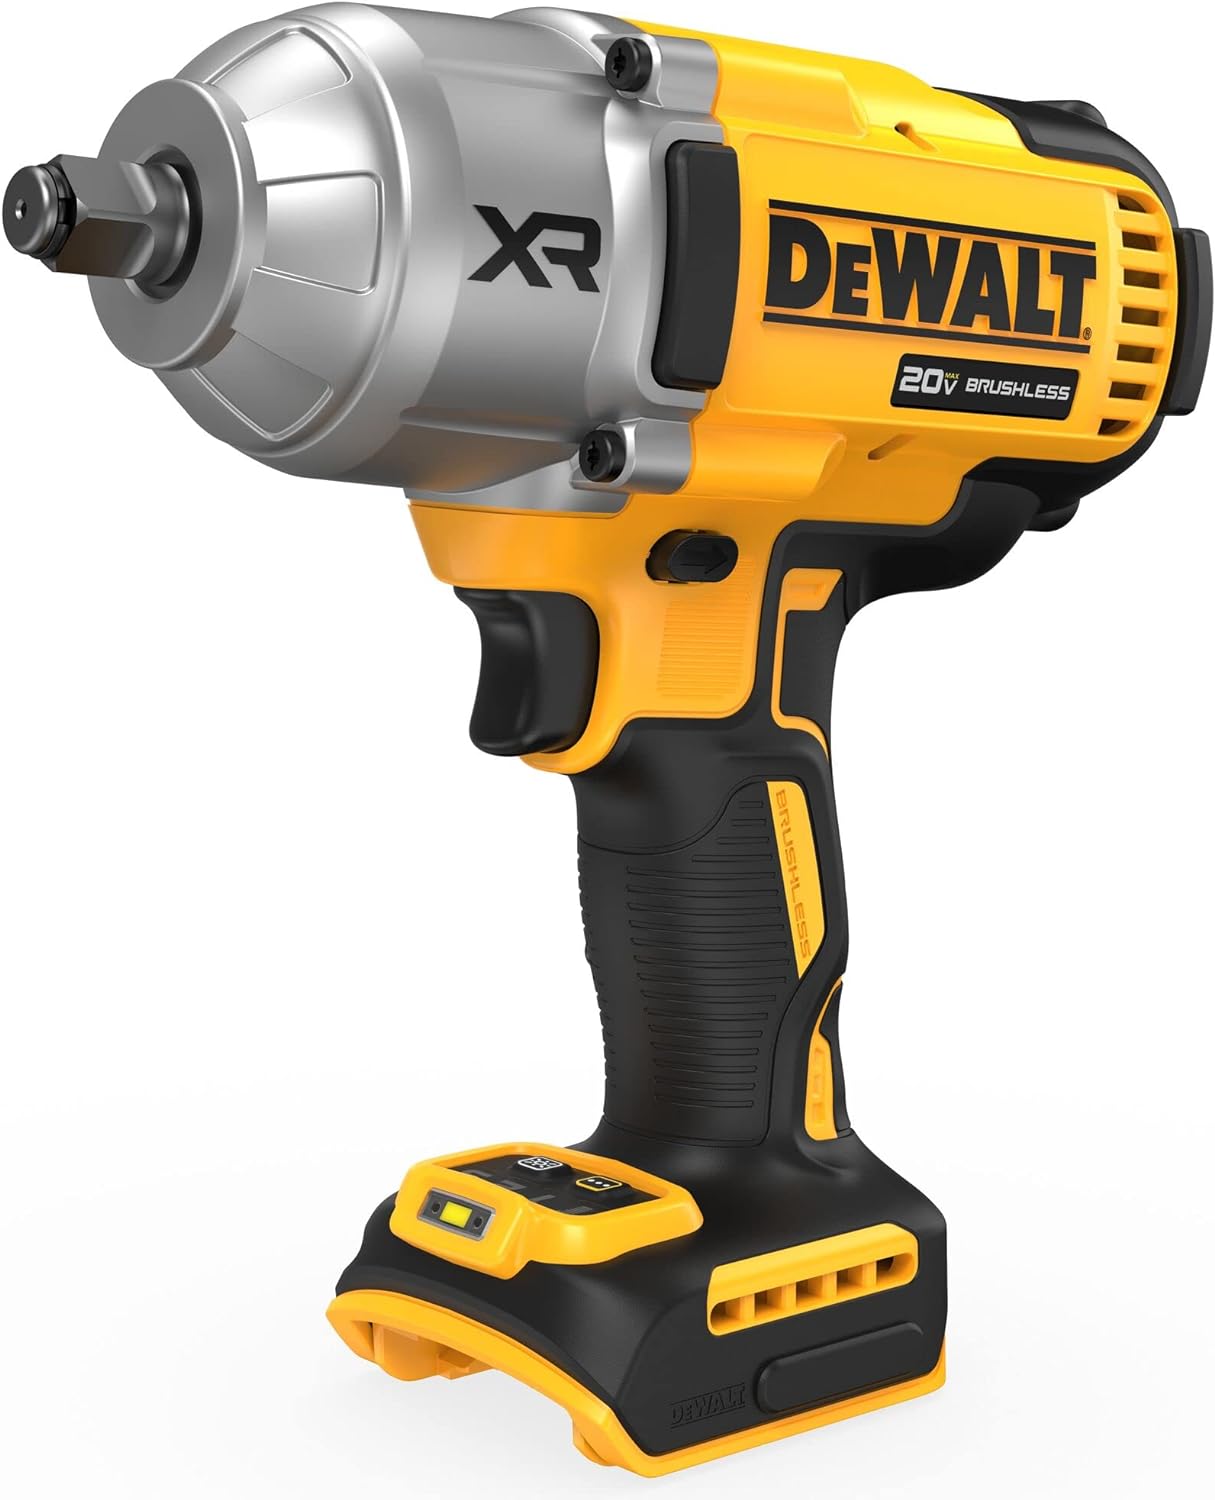 DEWALT 20V MAX Cordless Impact Wrench, 1/2 in., Bare Tool Only (DCF900B) - $227.95